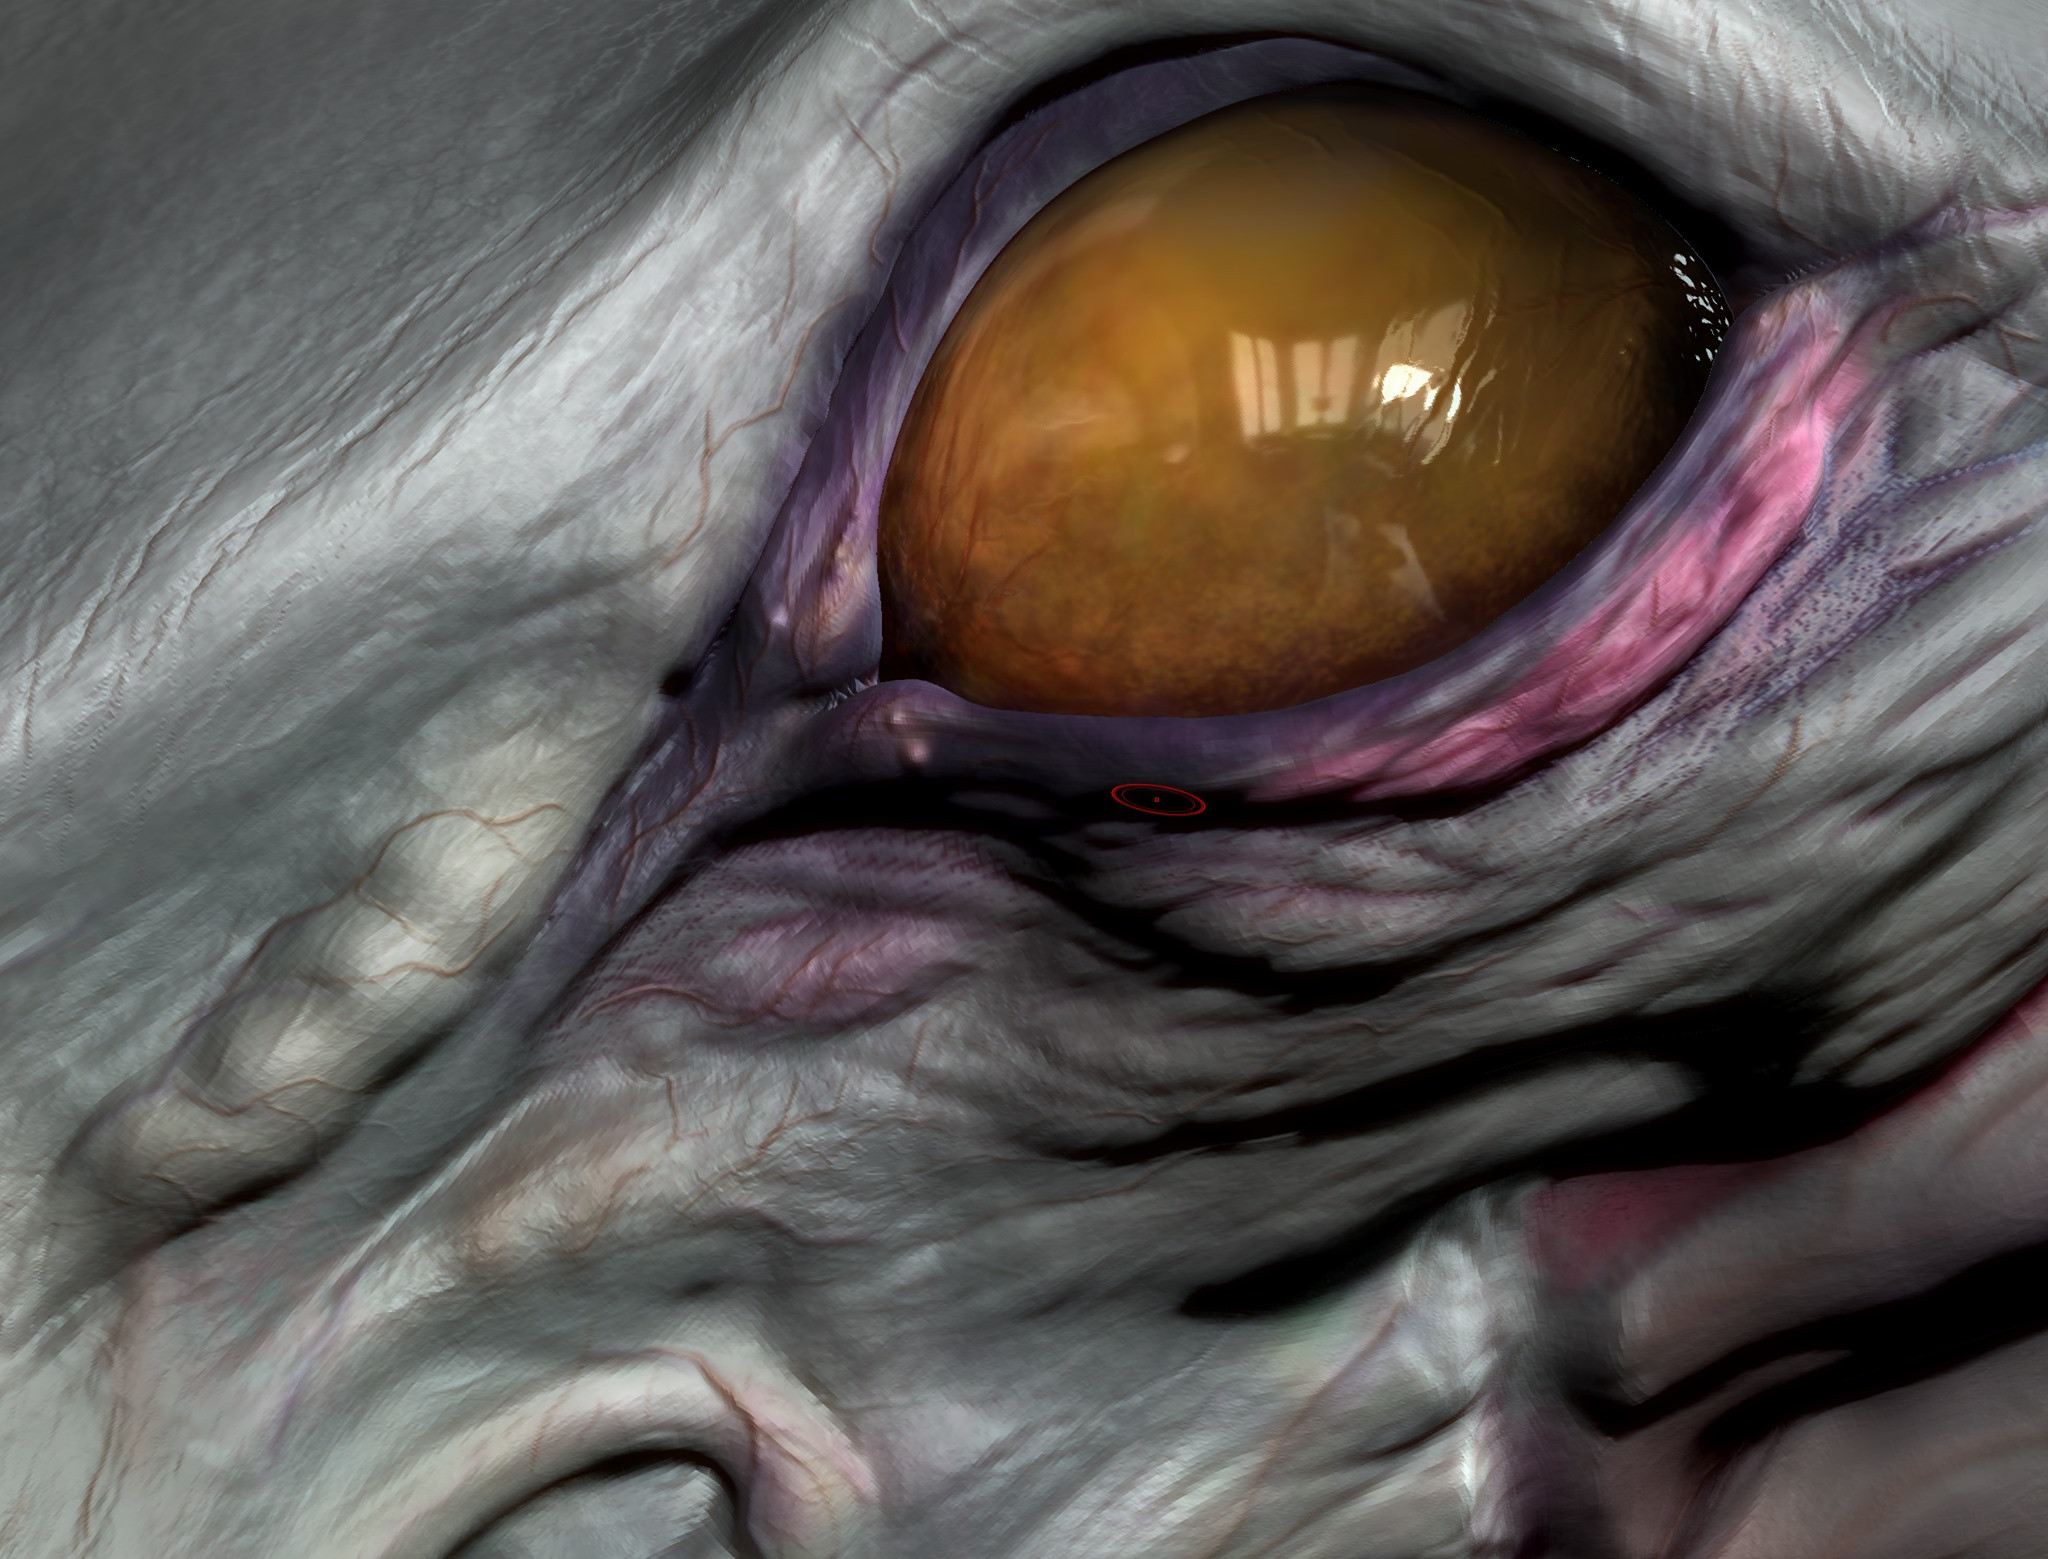 Crop of the Zbrush viewport from the tertiary stage.  I really like that Eye Shader i "set" on Zbrush. A Bit hard to replicate on Render. 
